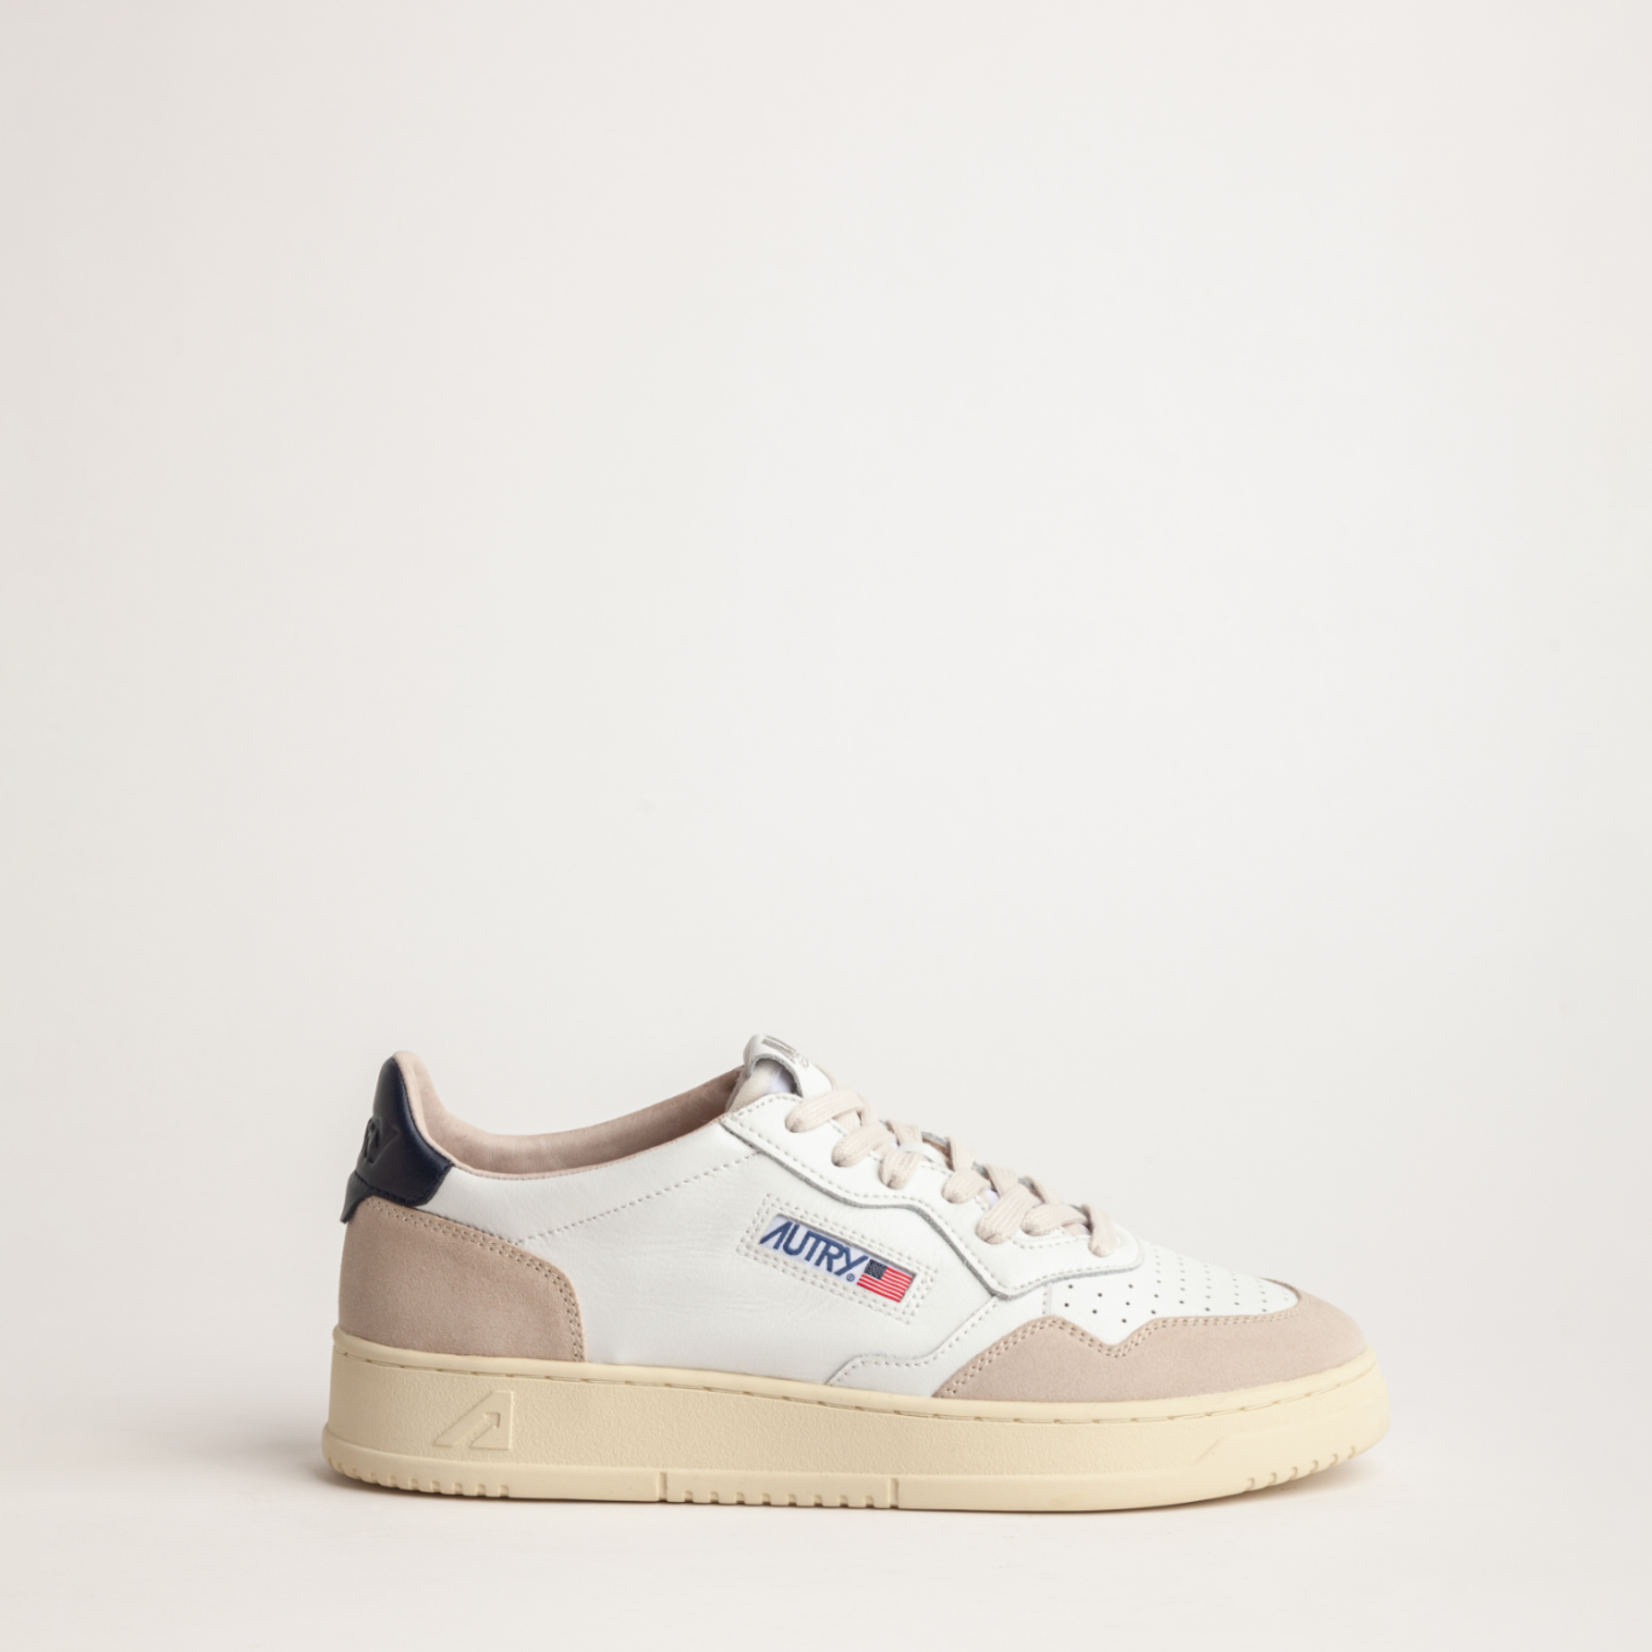 Autry Medalist low suede - White / Blue